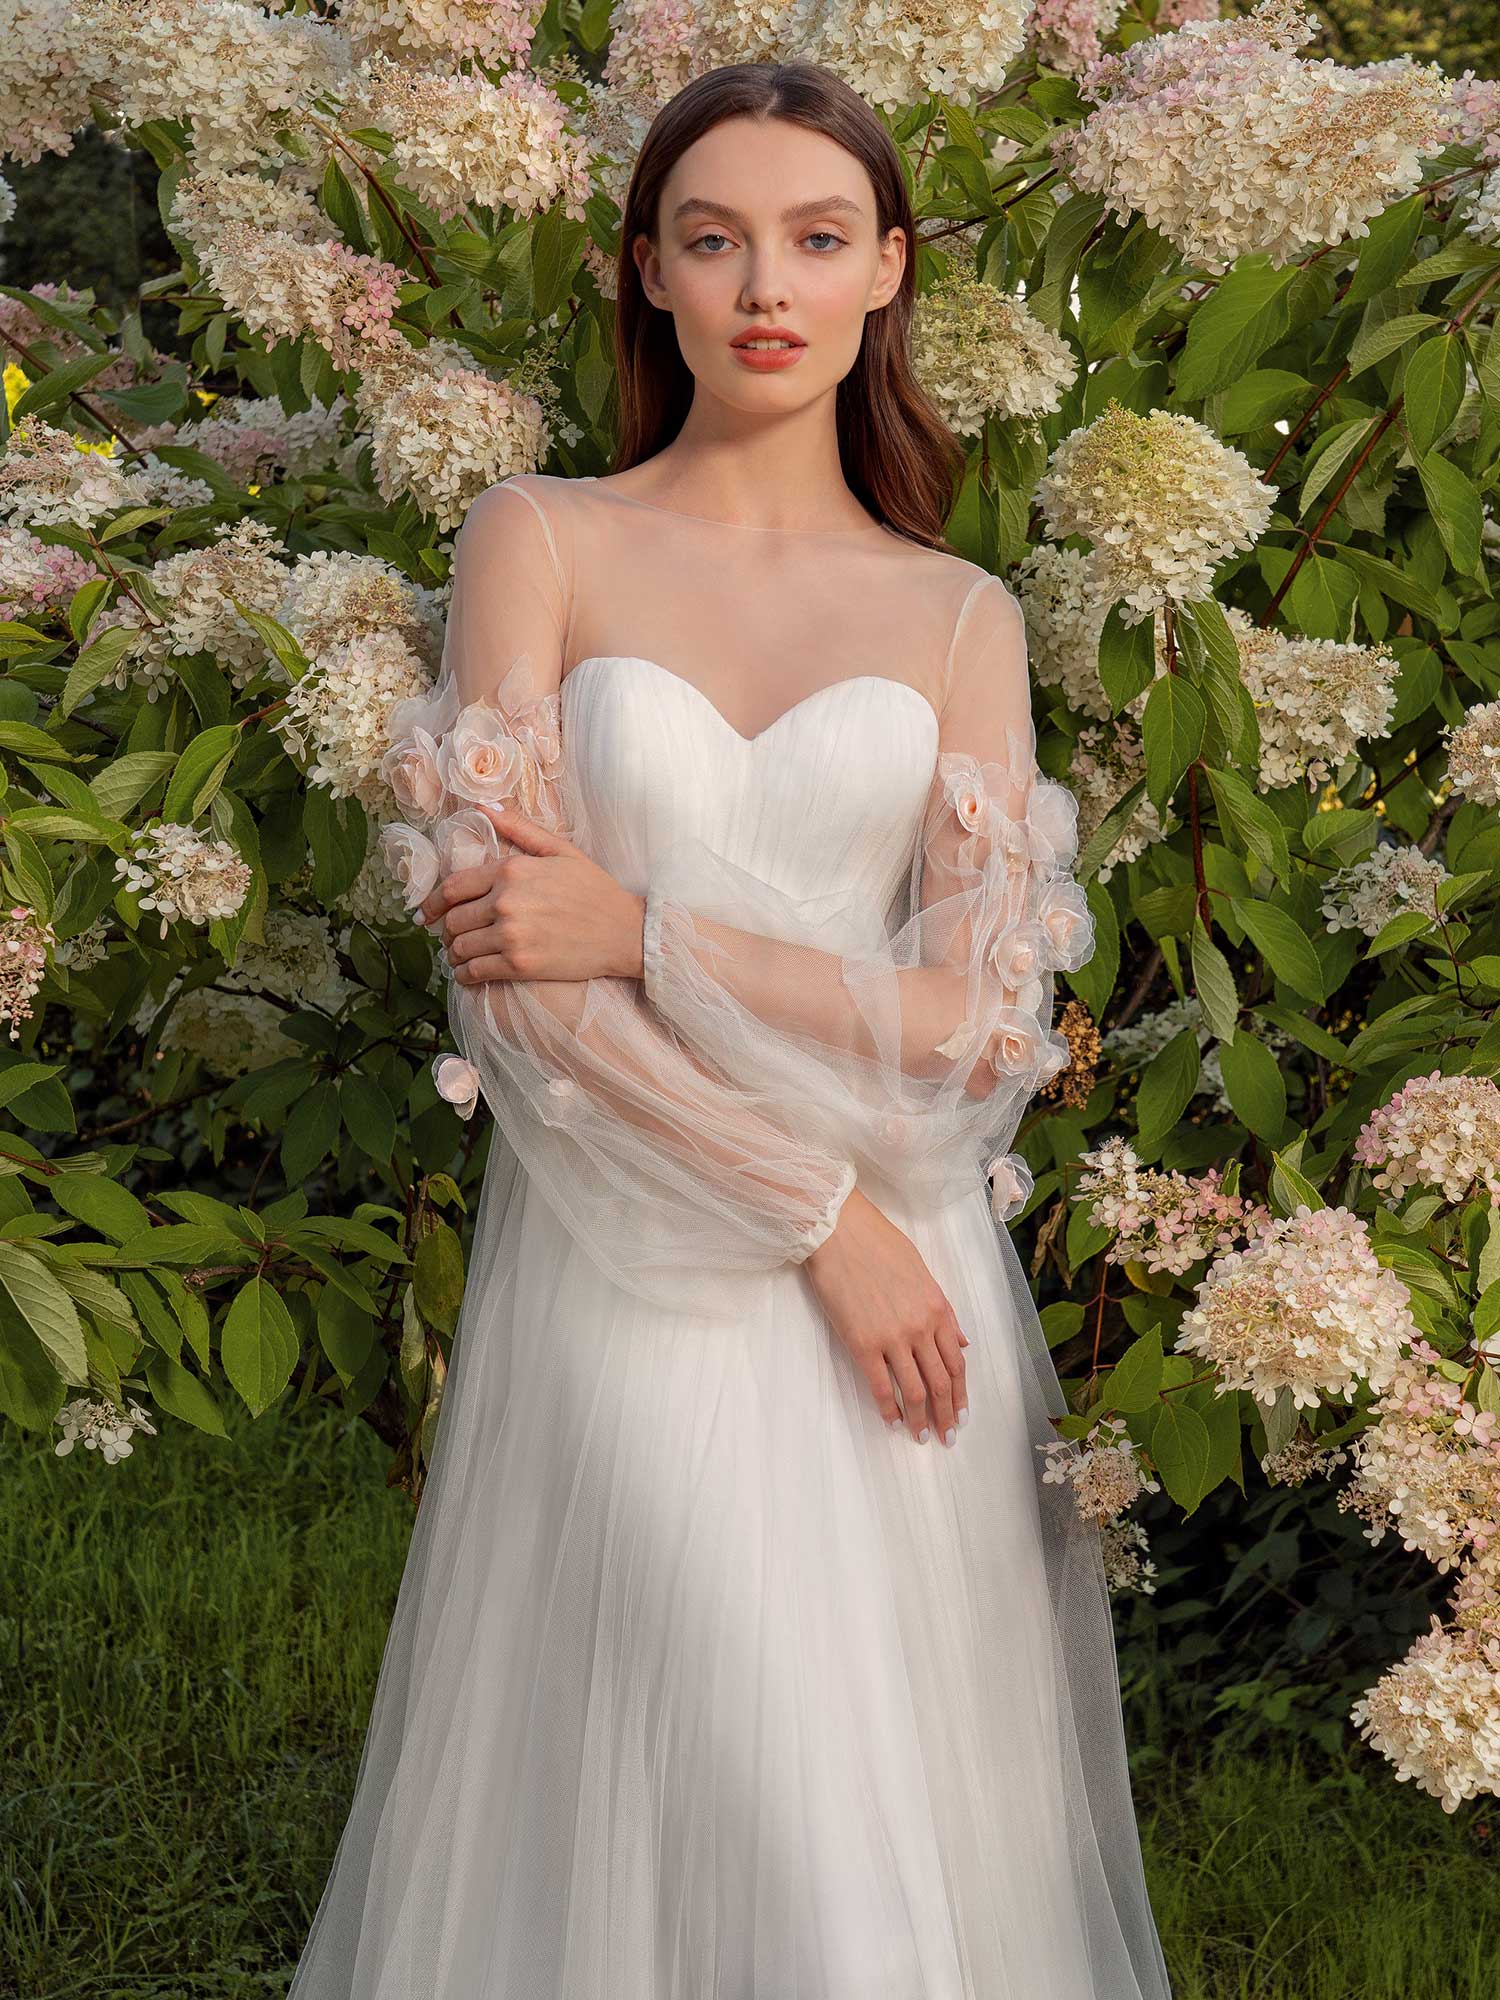 Tulle A-line wedding dress with floral sleeves